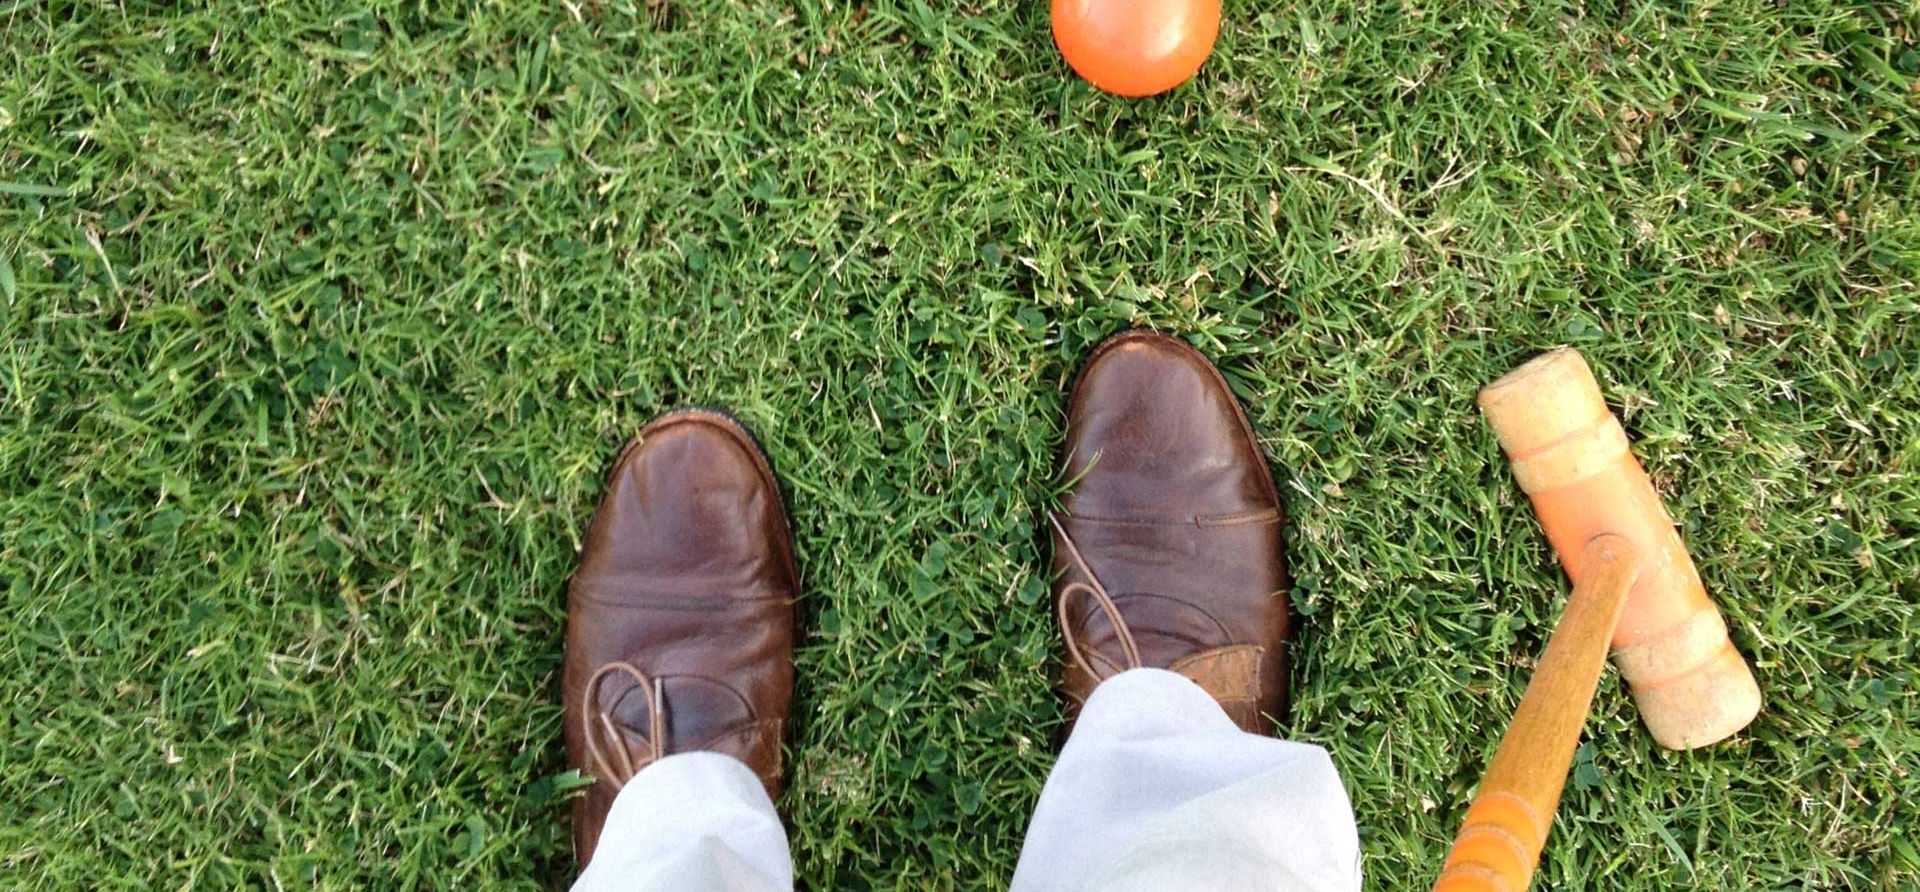 Dress Shoes, A Croquet Mallet and Ball